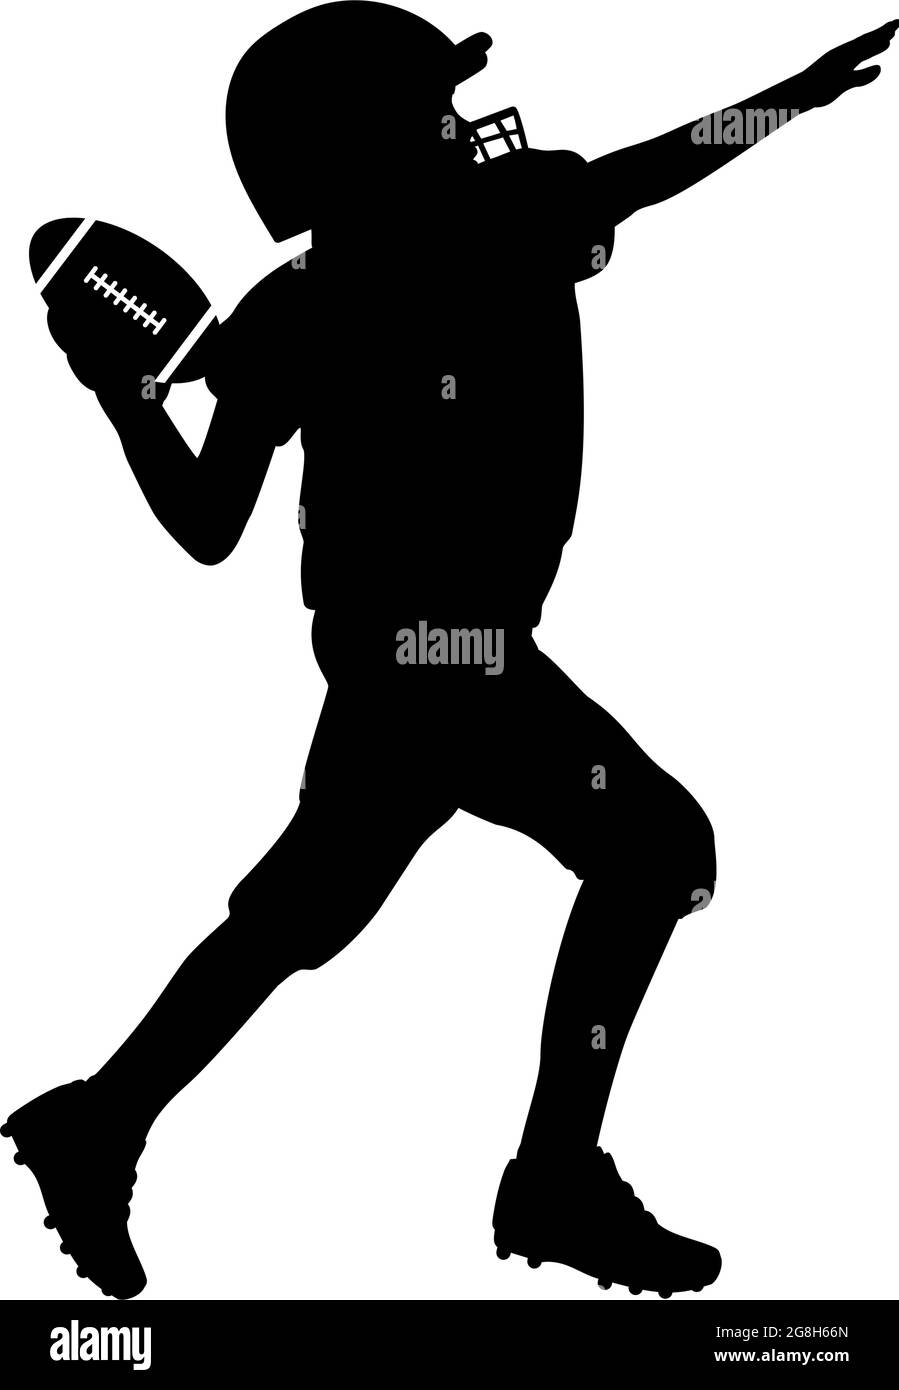 Silhouette of American football boy player throwing ball. Symbol sport. Illustration icon logo Stock Vector